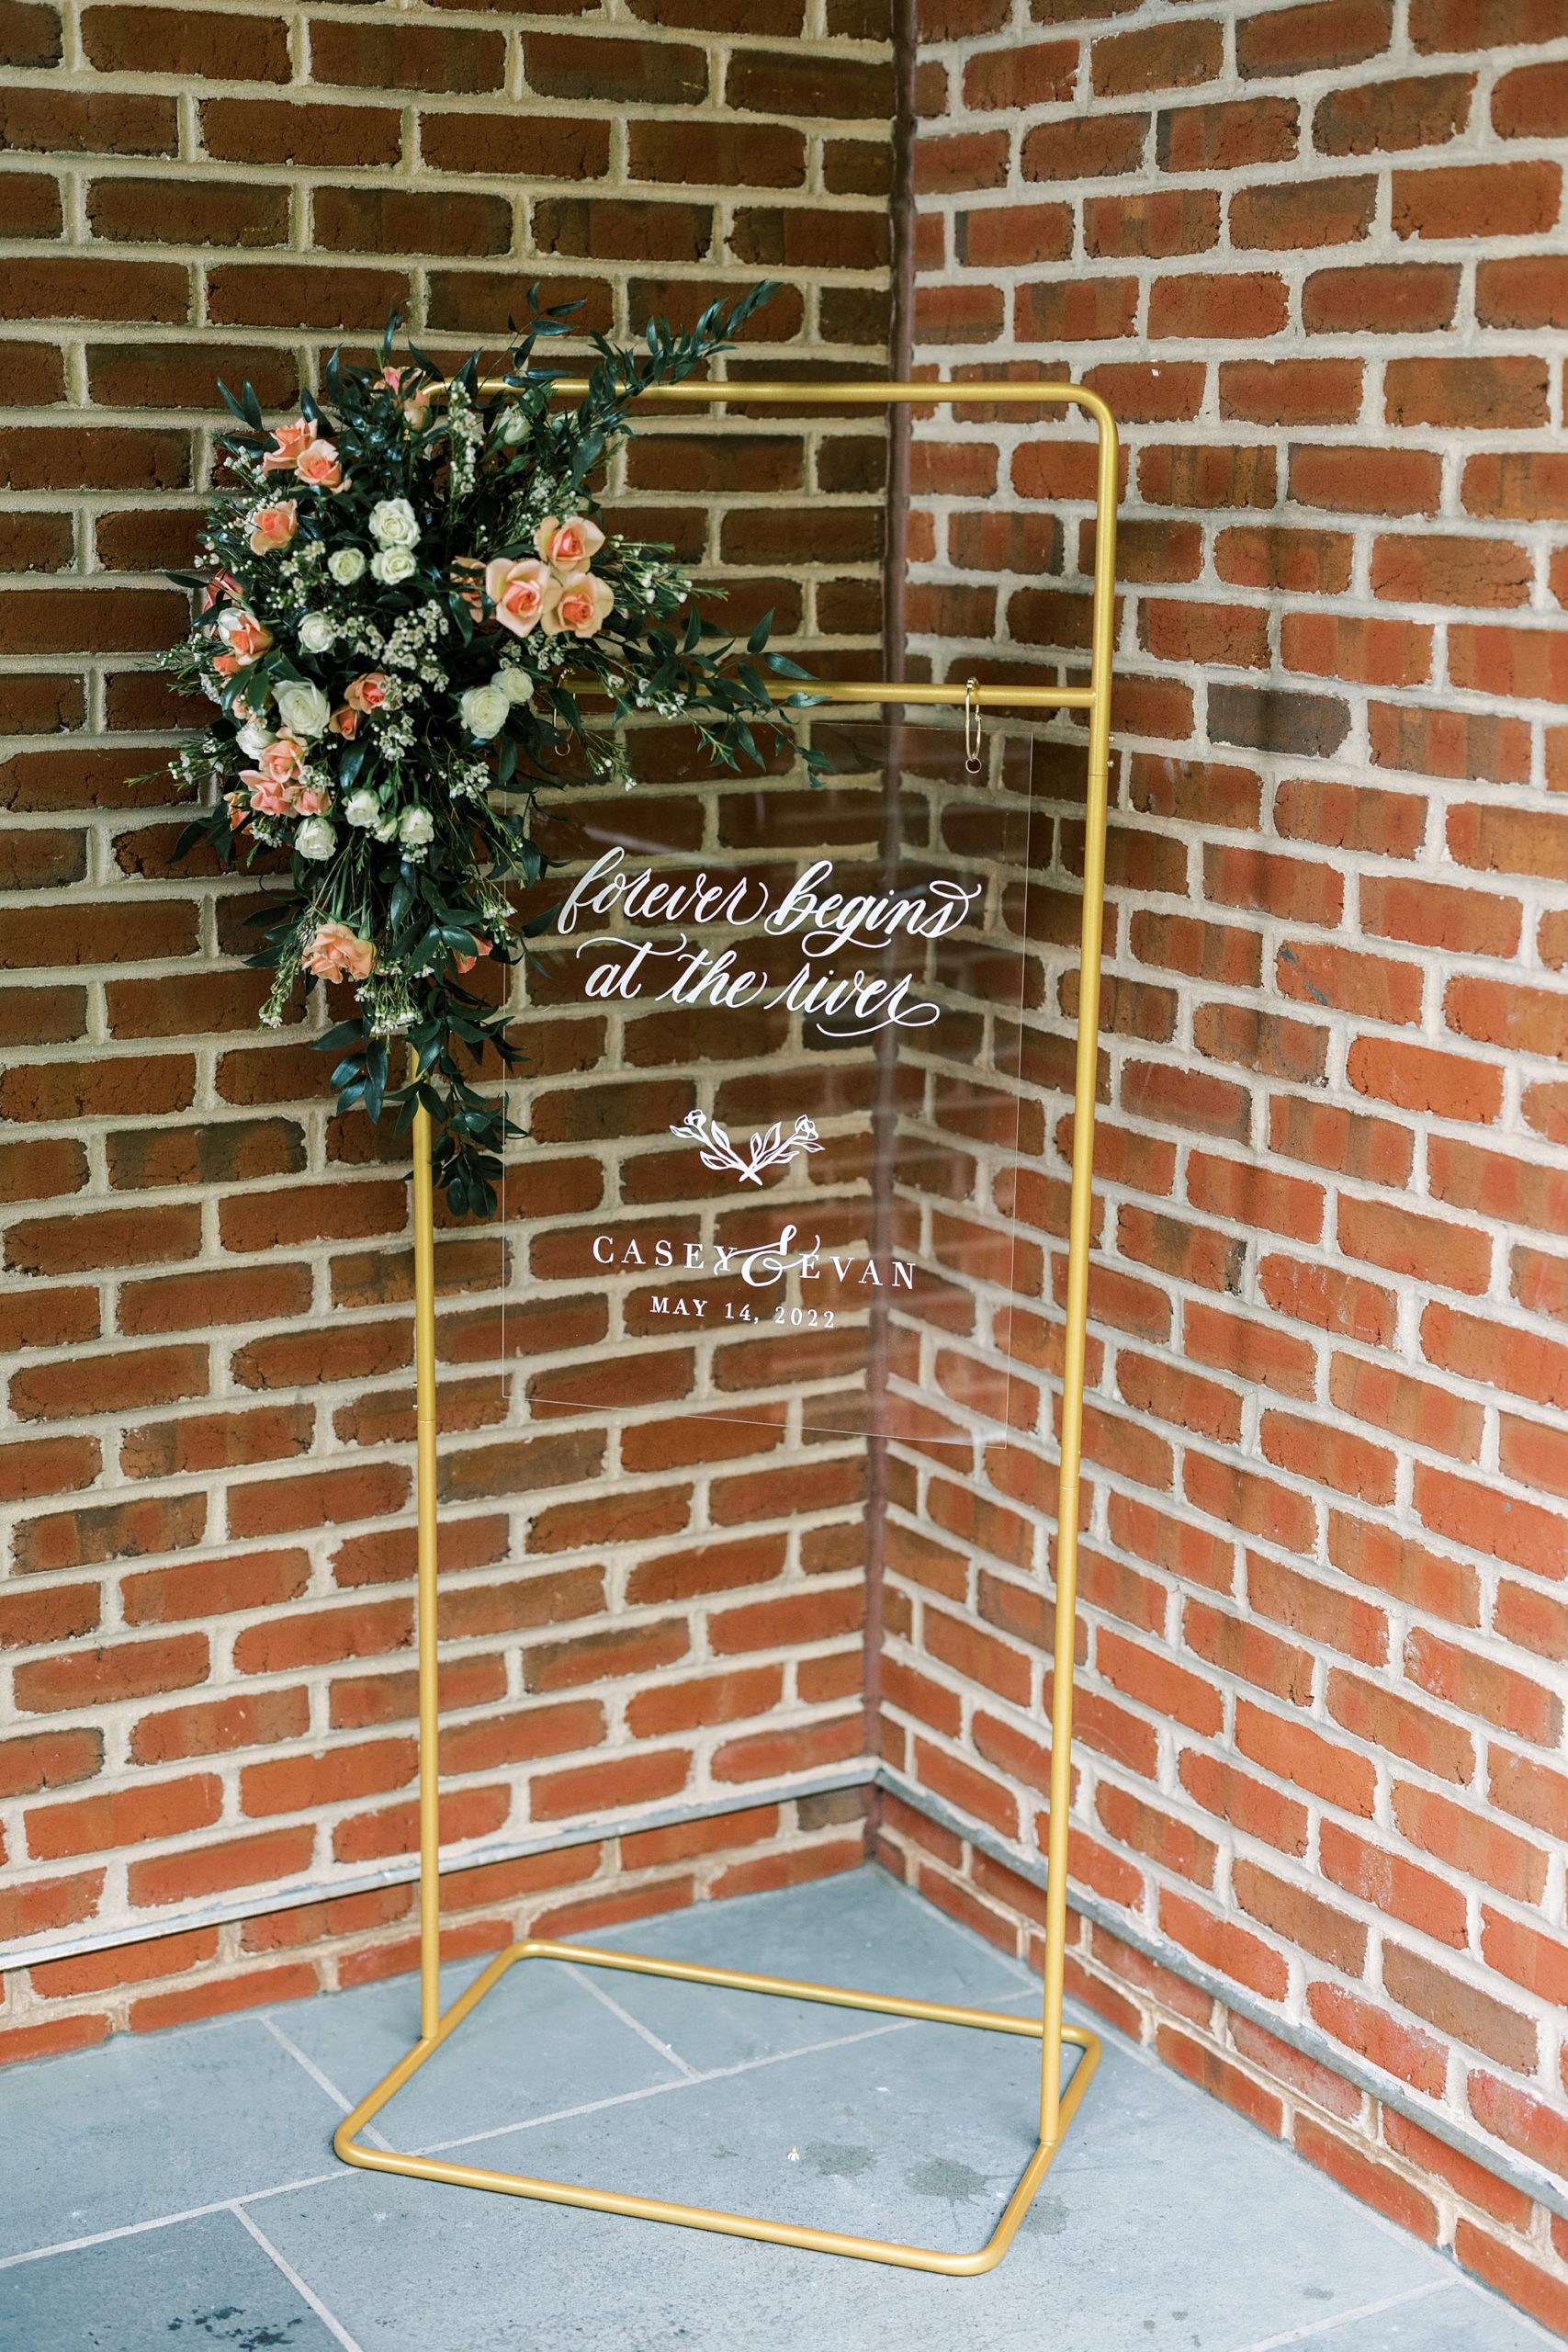 acrylic sign hangs on gold piping outside ceremony 